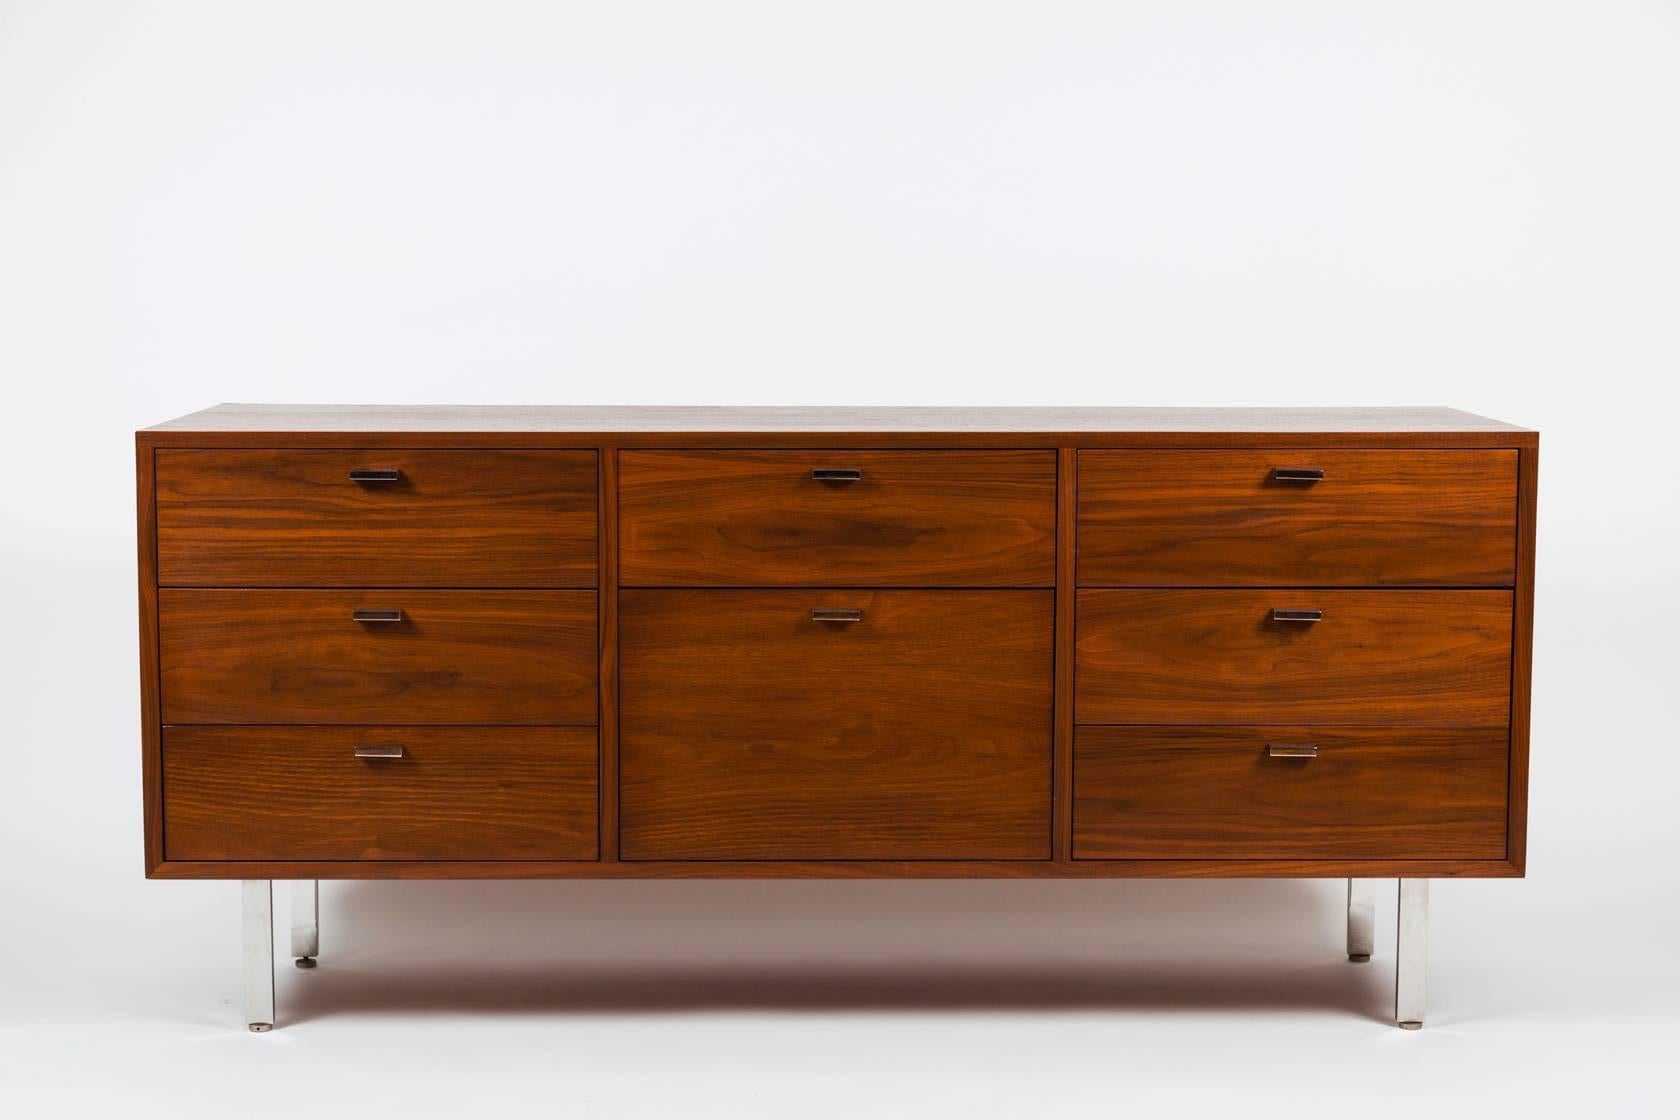 1960s Harvey Probber Walnut Credenza. Retains original manufacturer's label: signed 'Harvey Probber.' Executed in walnut with architectural chromed legs and door pulls. Can be used as a dresser or credenza.